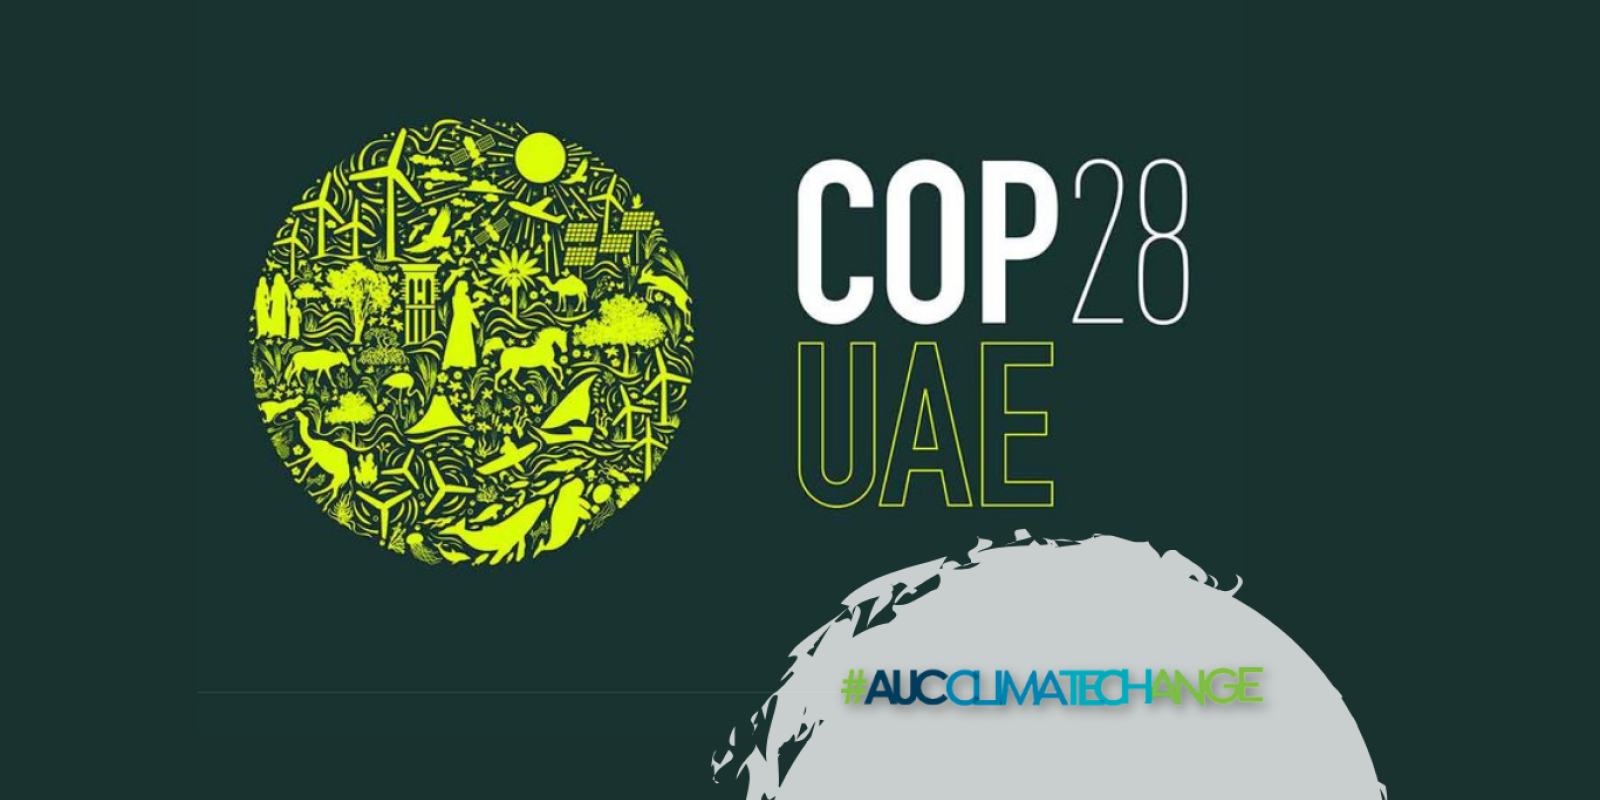 COP28 logo with green background featuring a large circle depicting animals, humans, and nature. AUC Climate Change initative logo in bottom right corner